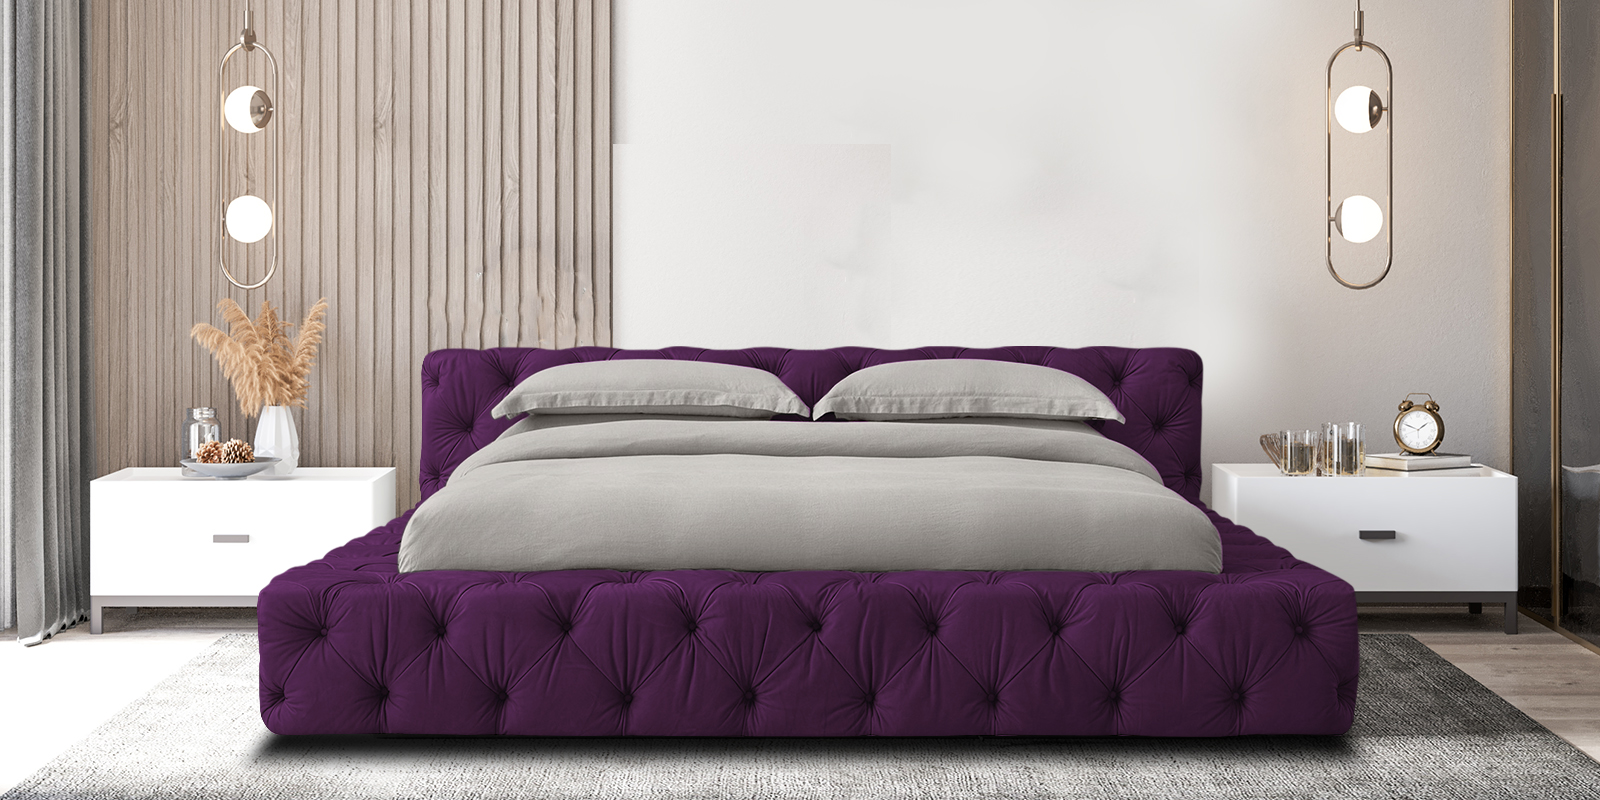 Exquisite Fabric Upholstered King Size Bed in Purple Colour ...